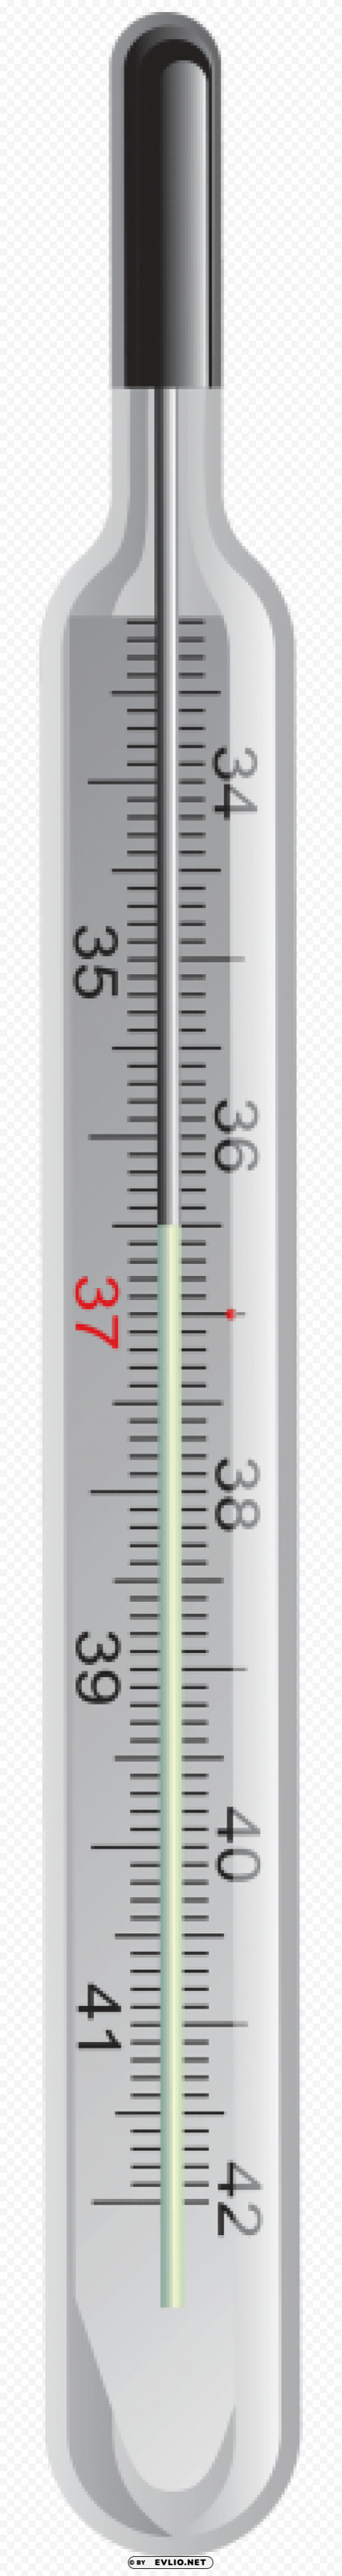 thermometer PNG files with transparency